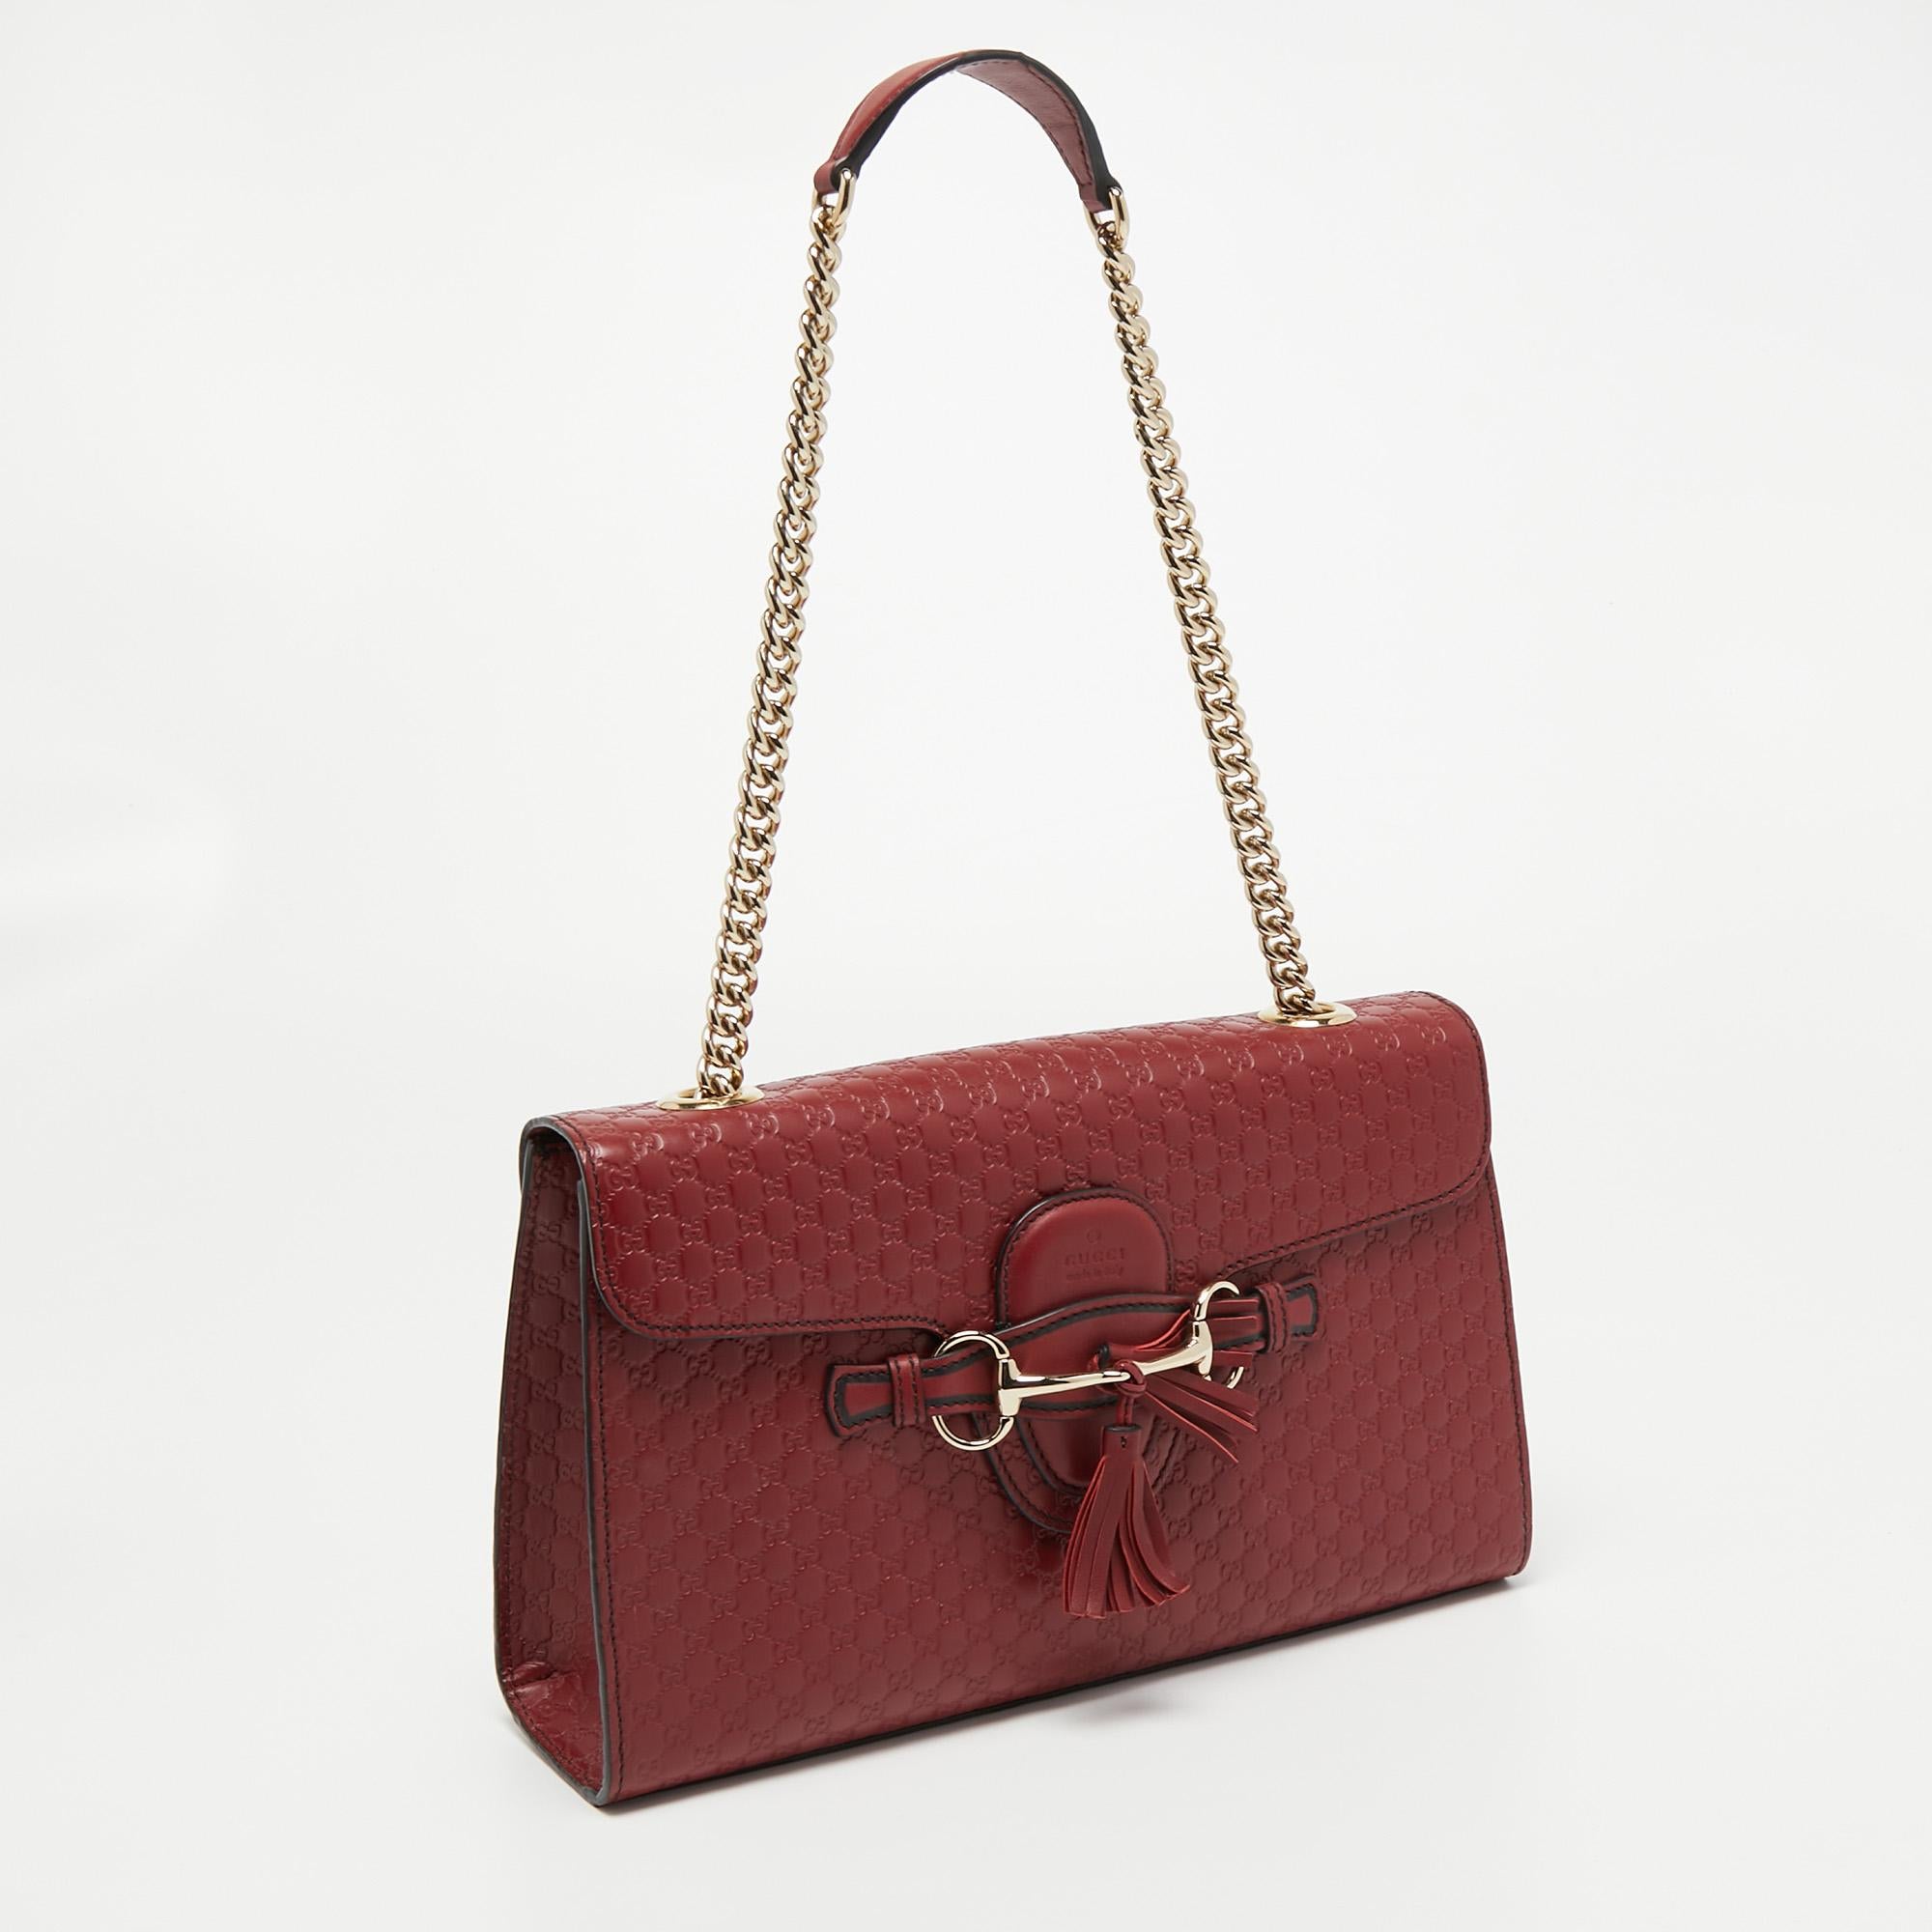 Gucci Red Microguccissima Leather Medium Emily Shoulder Bag 1